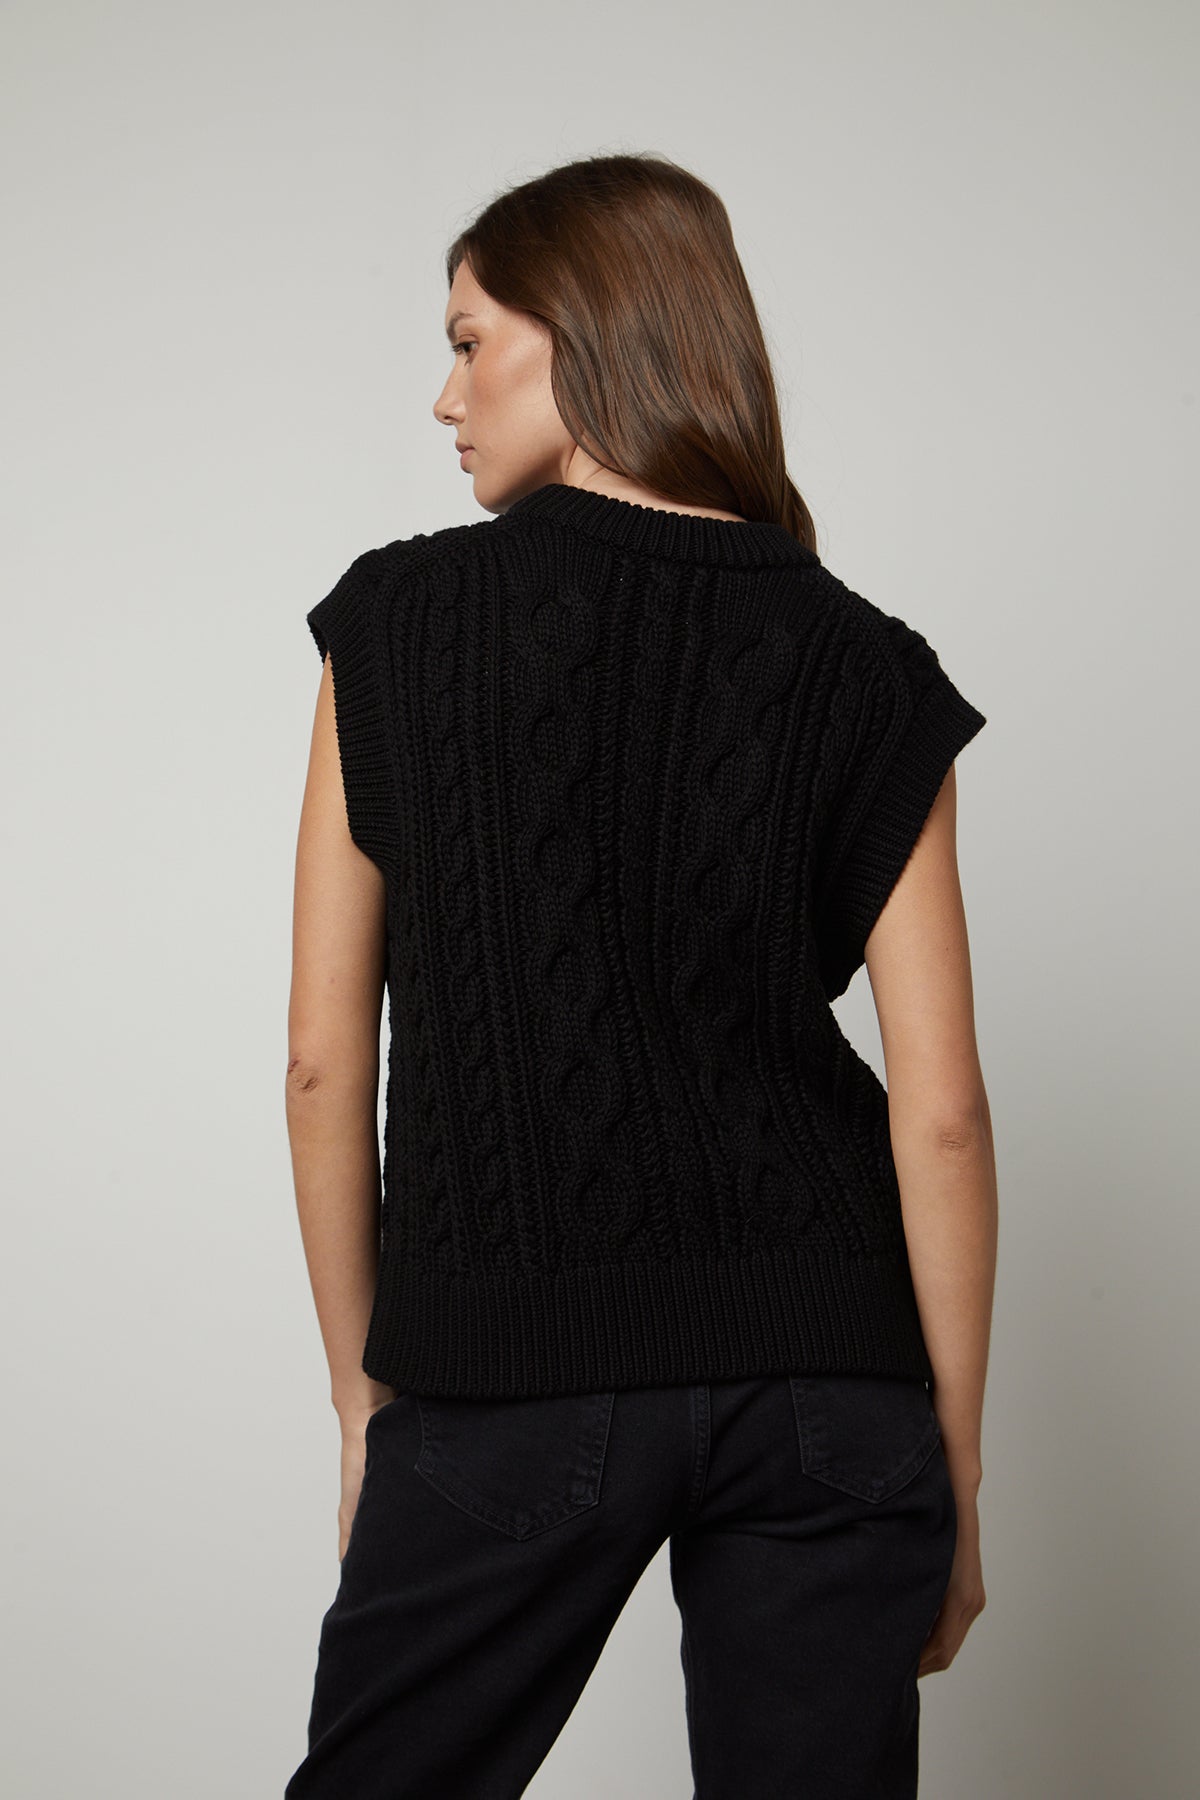 The back view of a woman wearing a black HADDEN SWEATER VEST by Velvet by Graham & Spencer.-26799841280193